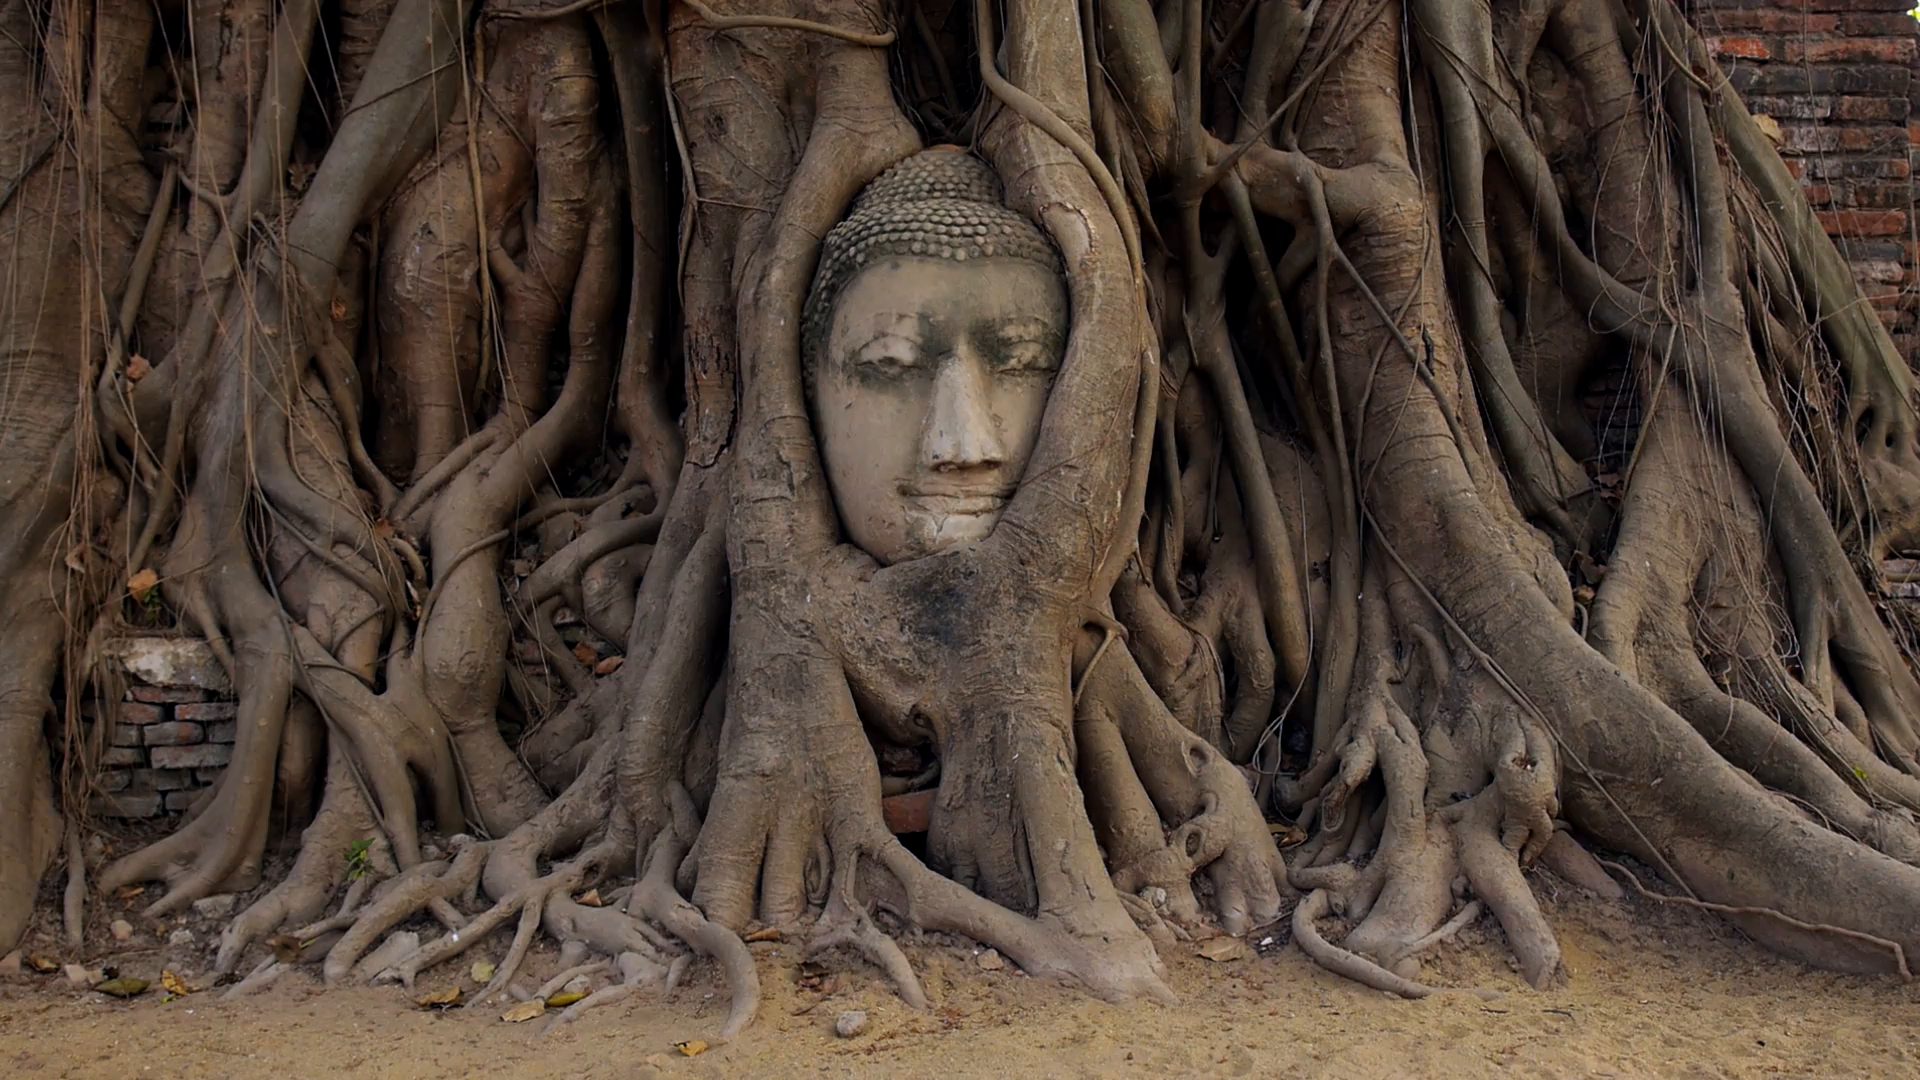 Head of Buddha Statue in the Tree Roots at Wat Mahathat, Ayutthaya ...